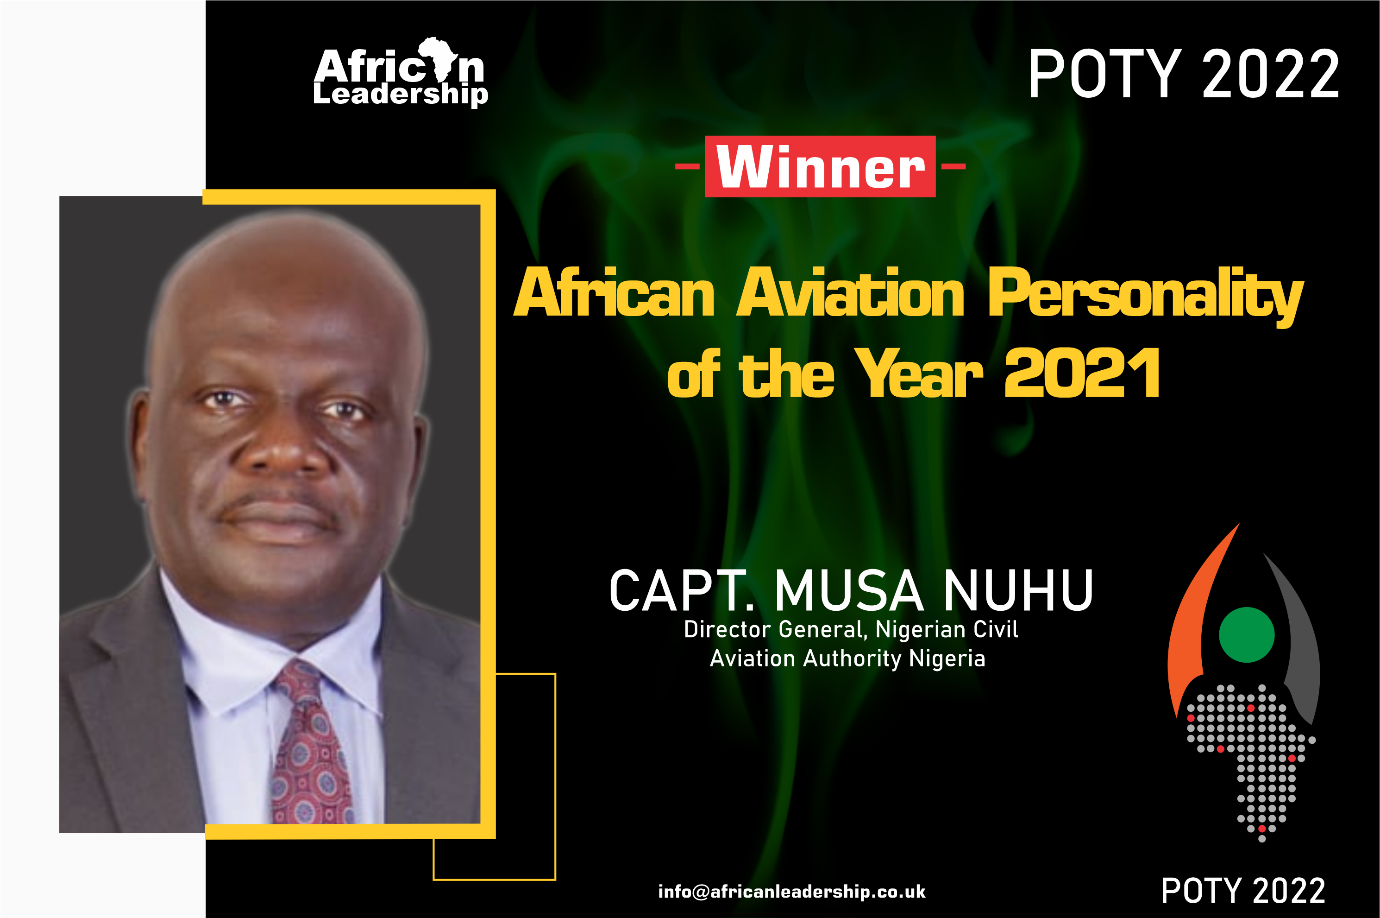 Nigeria’s Capt. Musa Nuhu bags African Aviation Personality of the Year Award